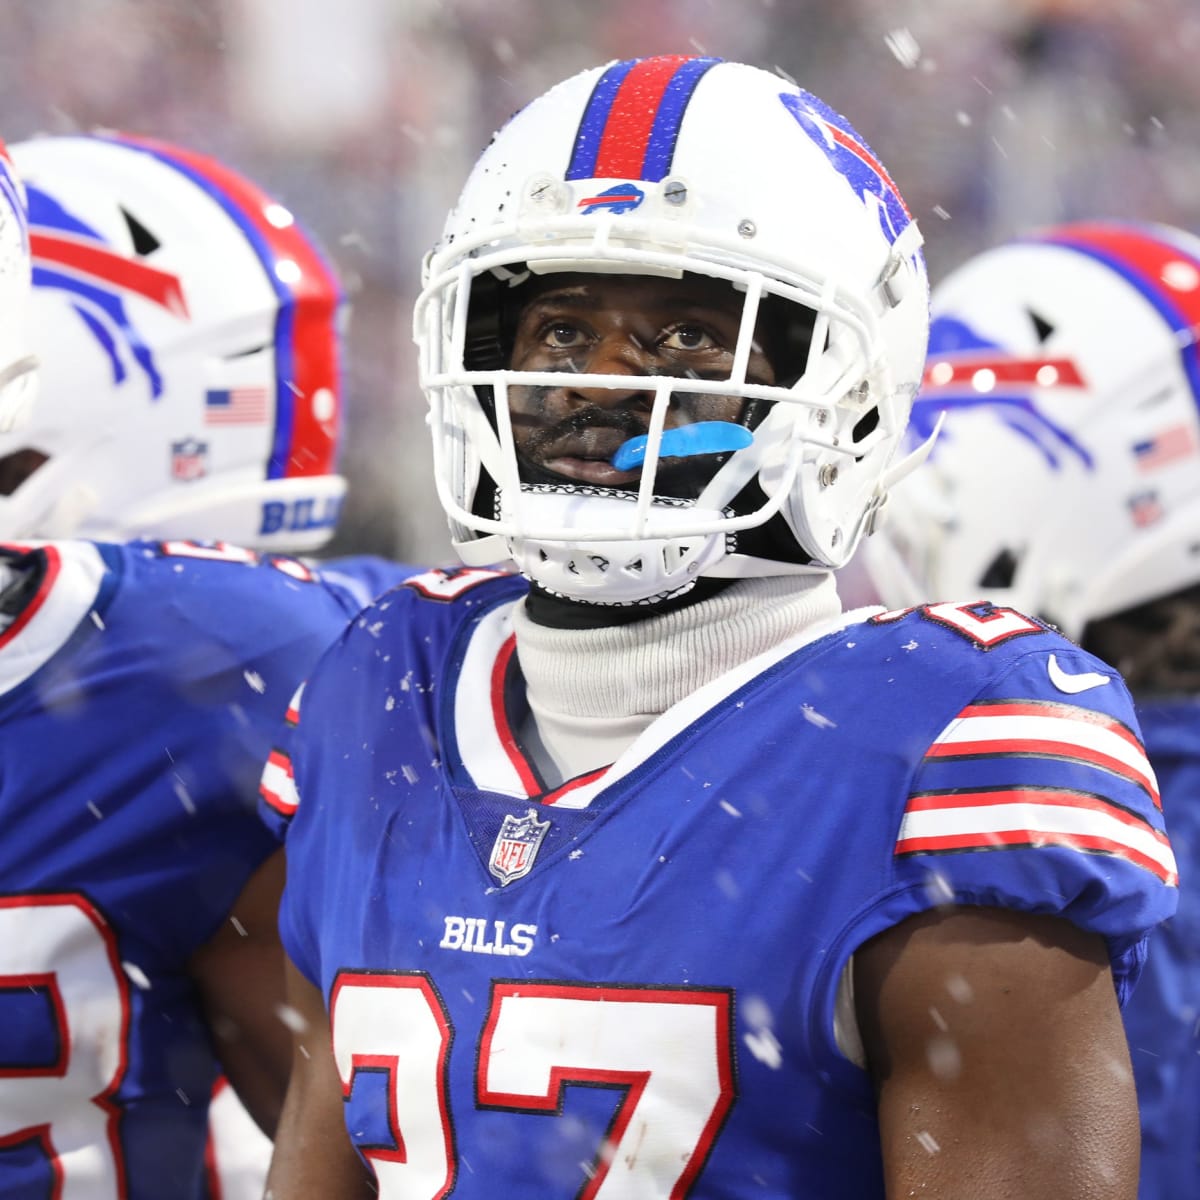 Free tickets! No charge for Bills vs. Jets at Ford Field